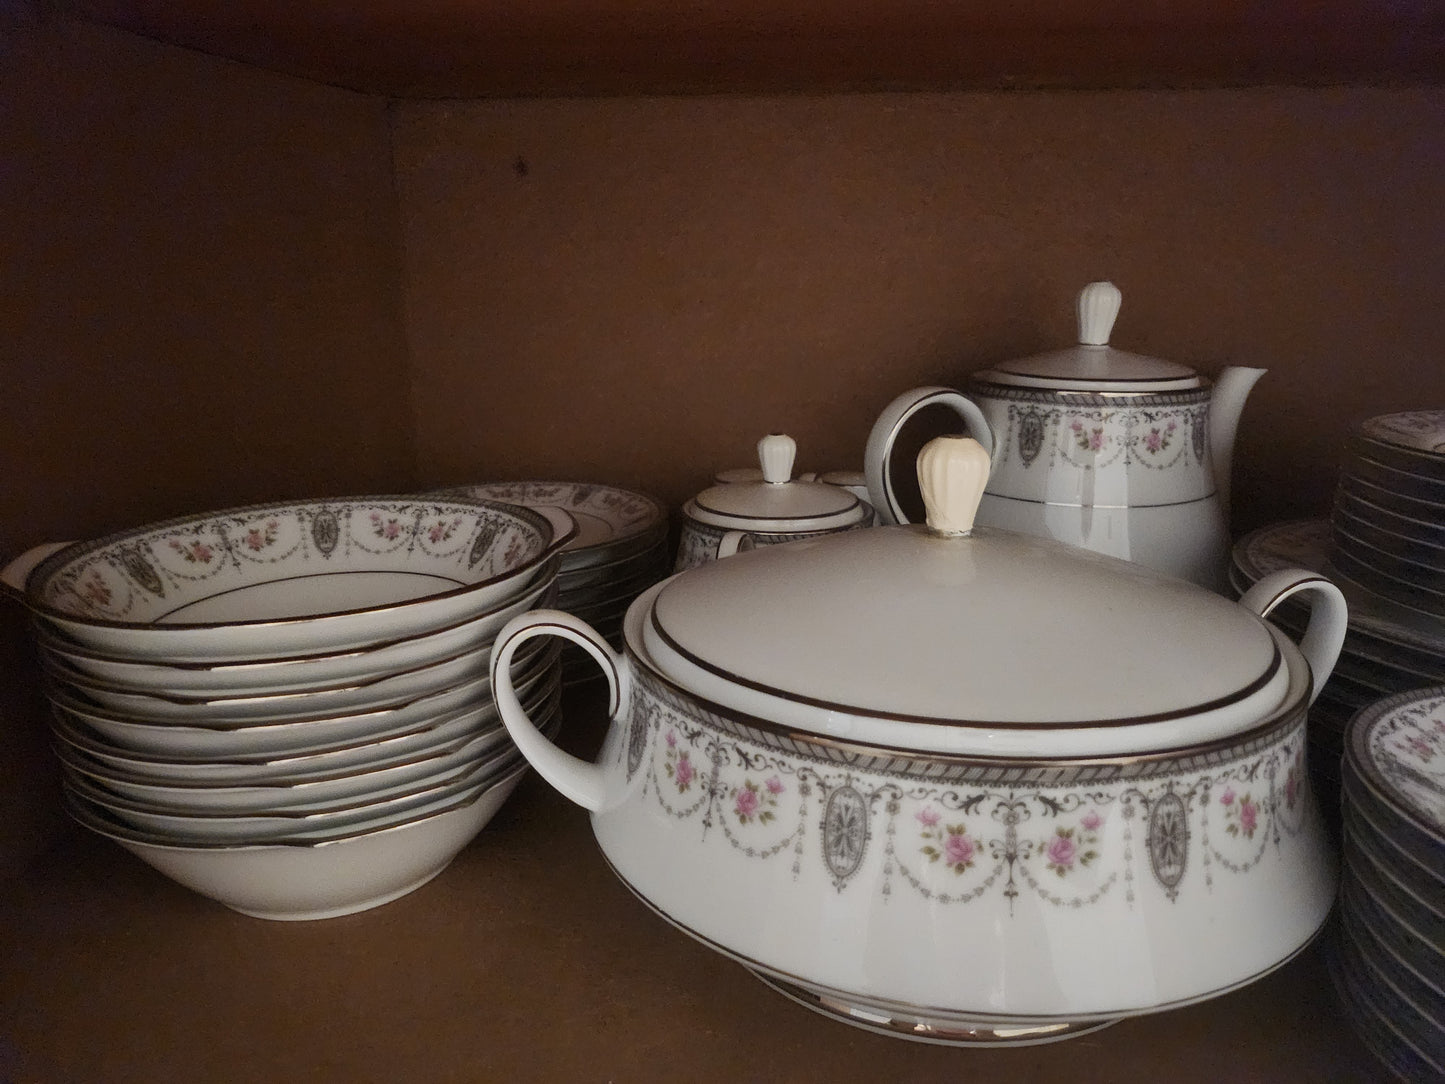 Vintage Japanese Noritake 8 Piece Dinner Set by Clarice 1971 and an Array of Table Accessories - Rare as a Complete set